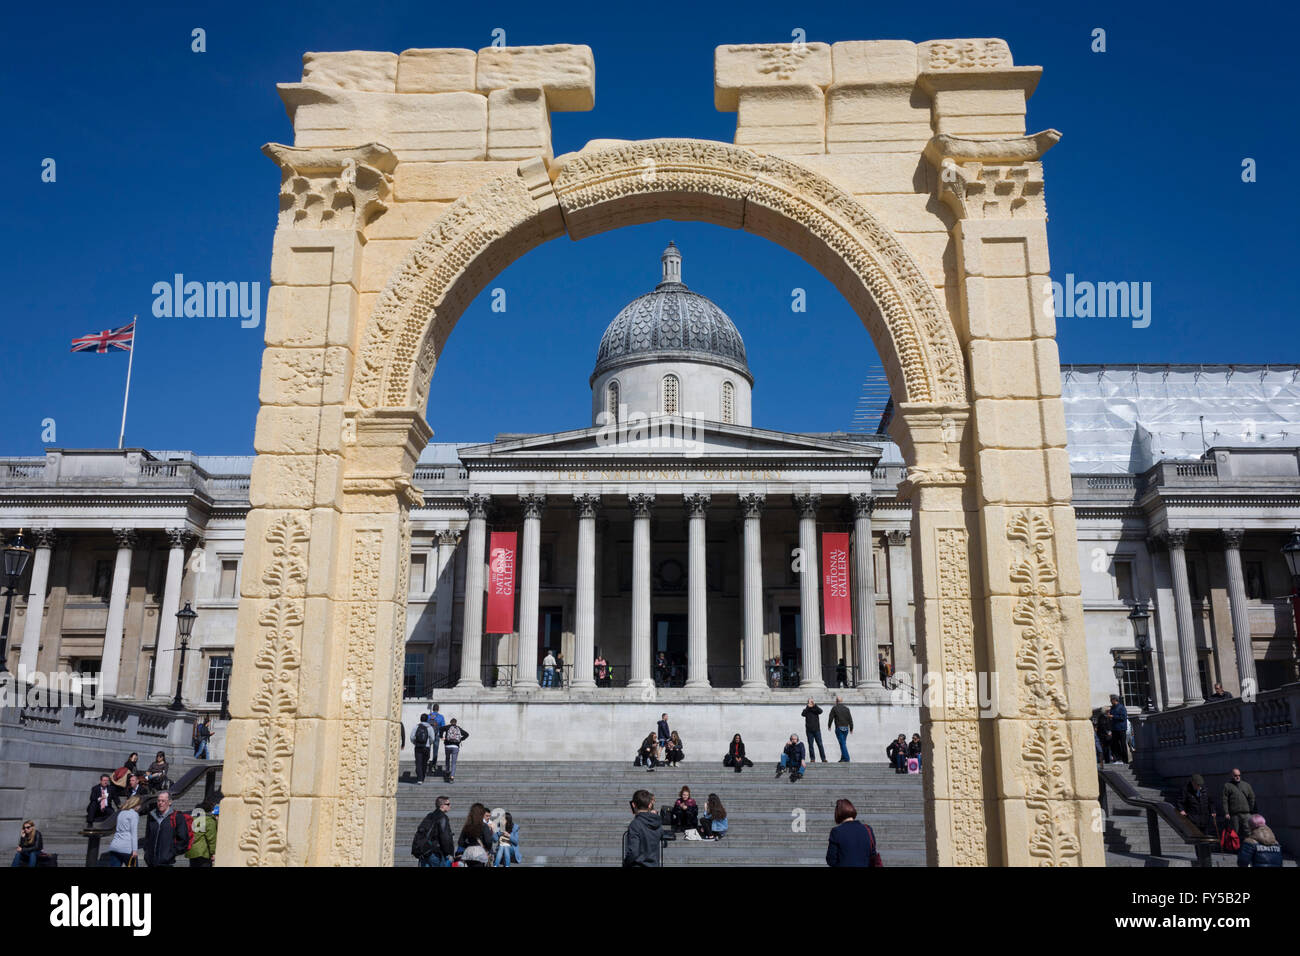 The scale replica of the 2,000 year-old Arch of Triumph in London's Trafalgar Square. The arch has been made from Egyptian marble by the Institute of Digital Archaeology (IDA) using 3D technology, based on photographs of the original arch. It will travel to cities around the world after leaving London. Stock Photo